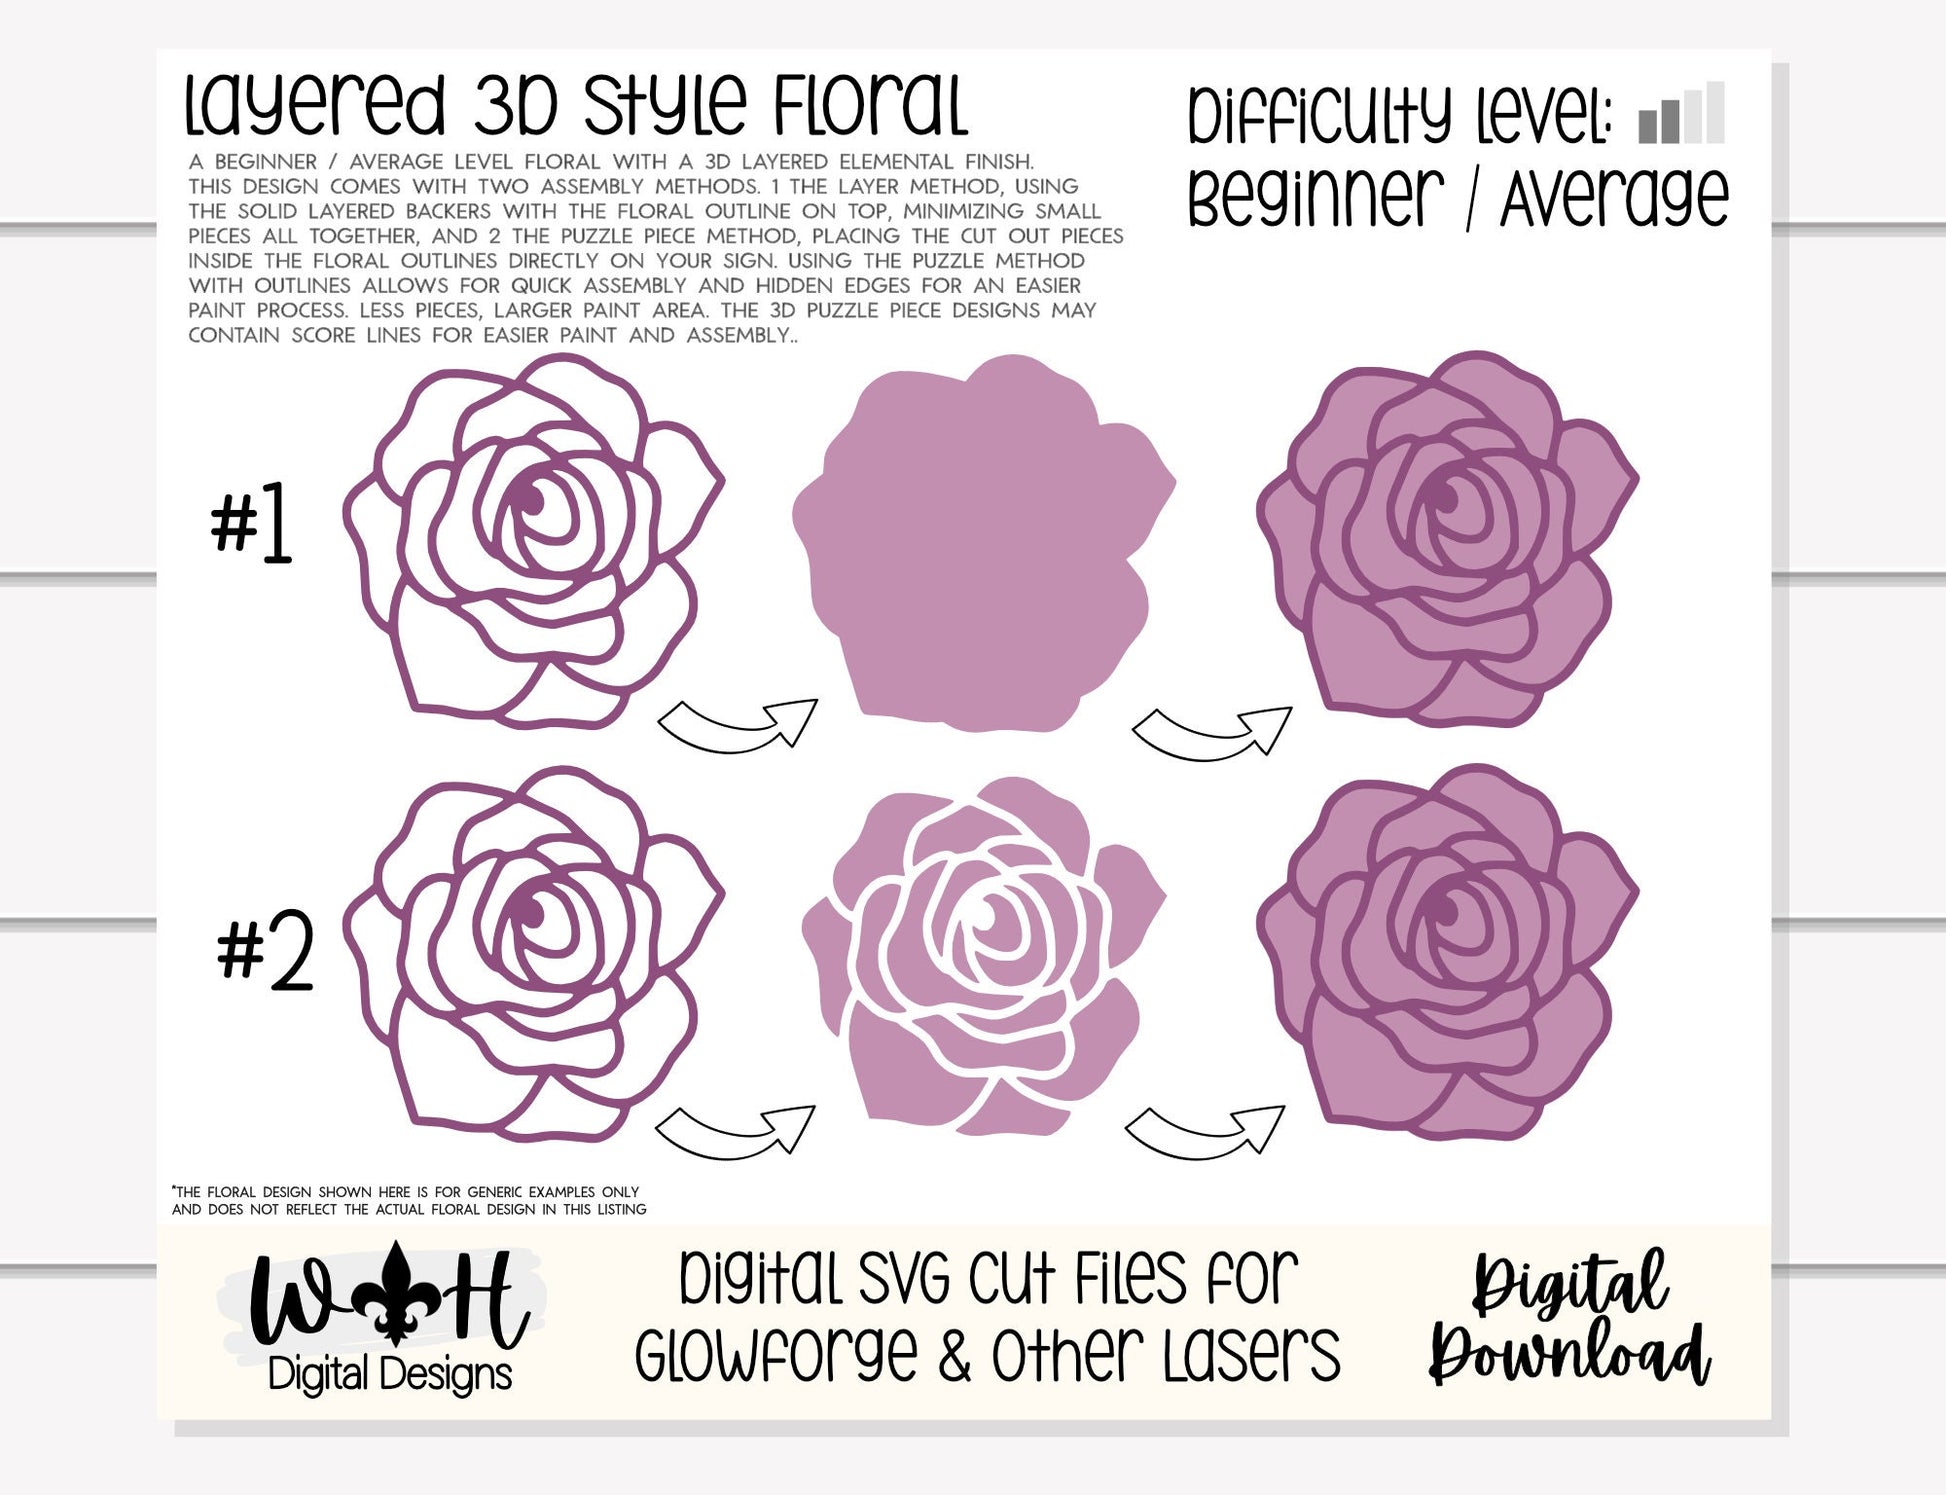 Dahlia Simple Floral Shelf Sitter Sign - Round Sign Making and DIY Kits - Beginner Cut File For Glowforge Lasers - Digital SVG File